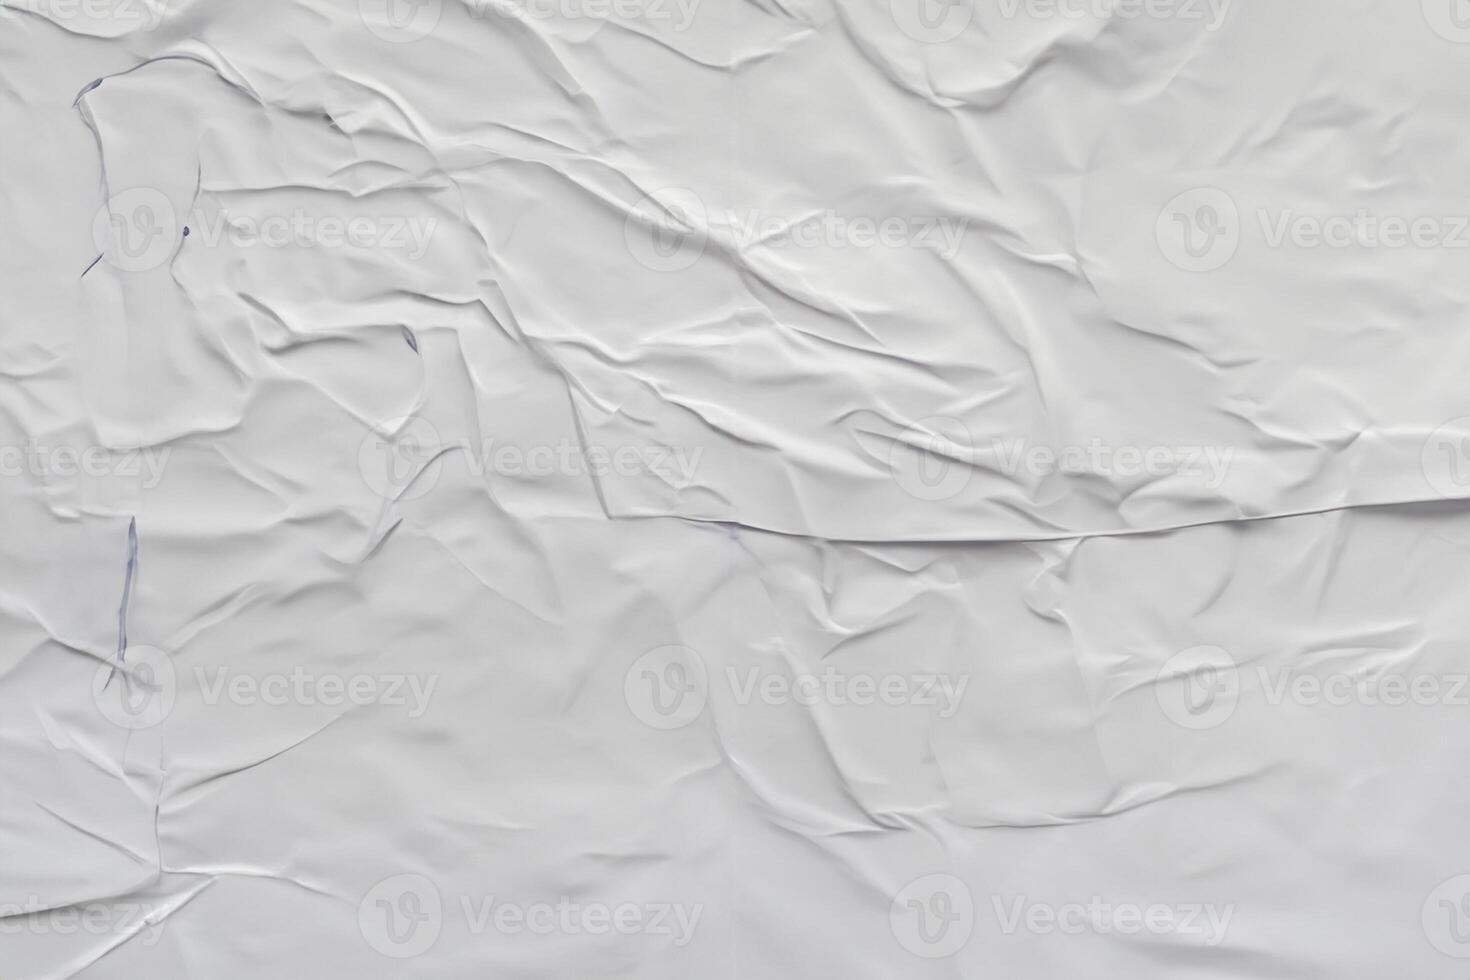 Blank white crumpled and creased paper poster texture background photo